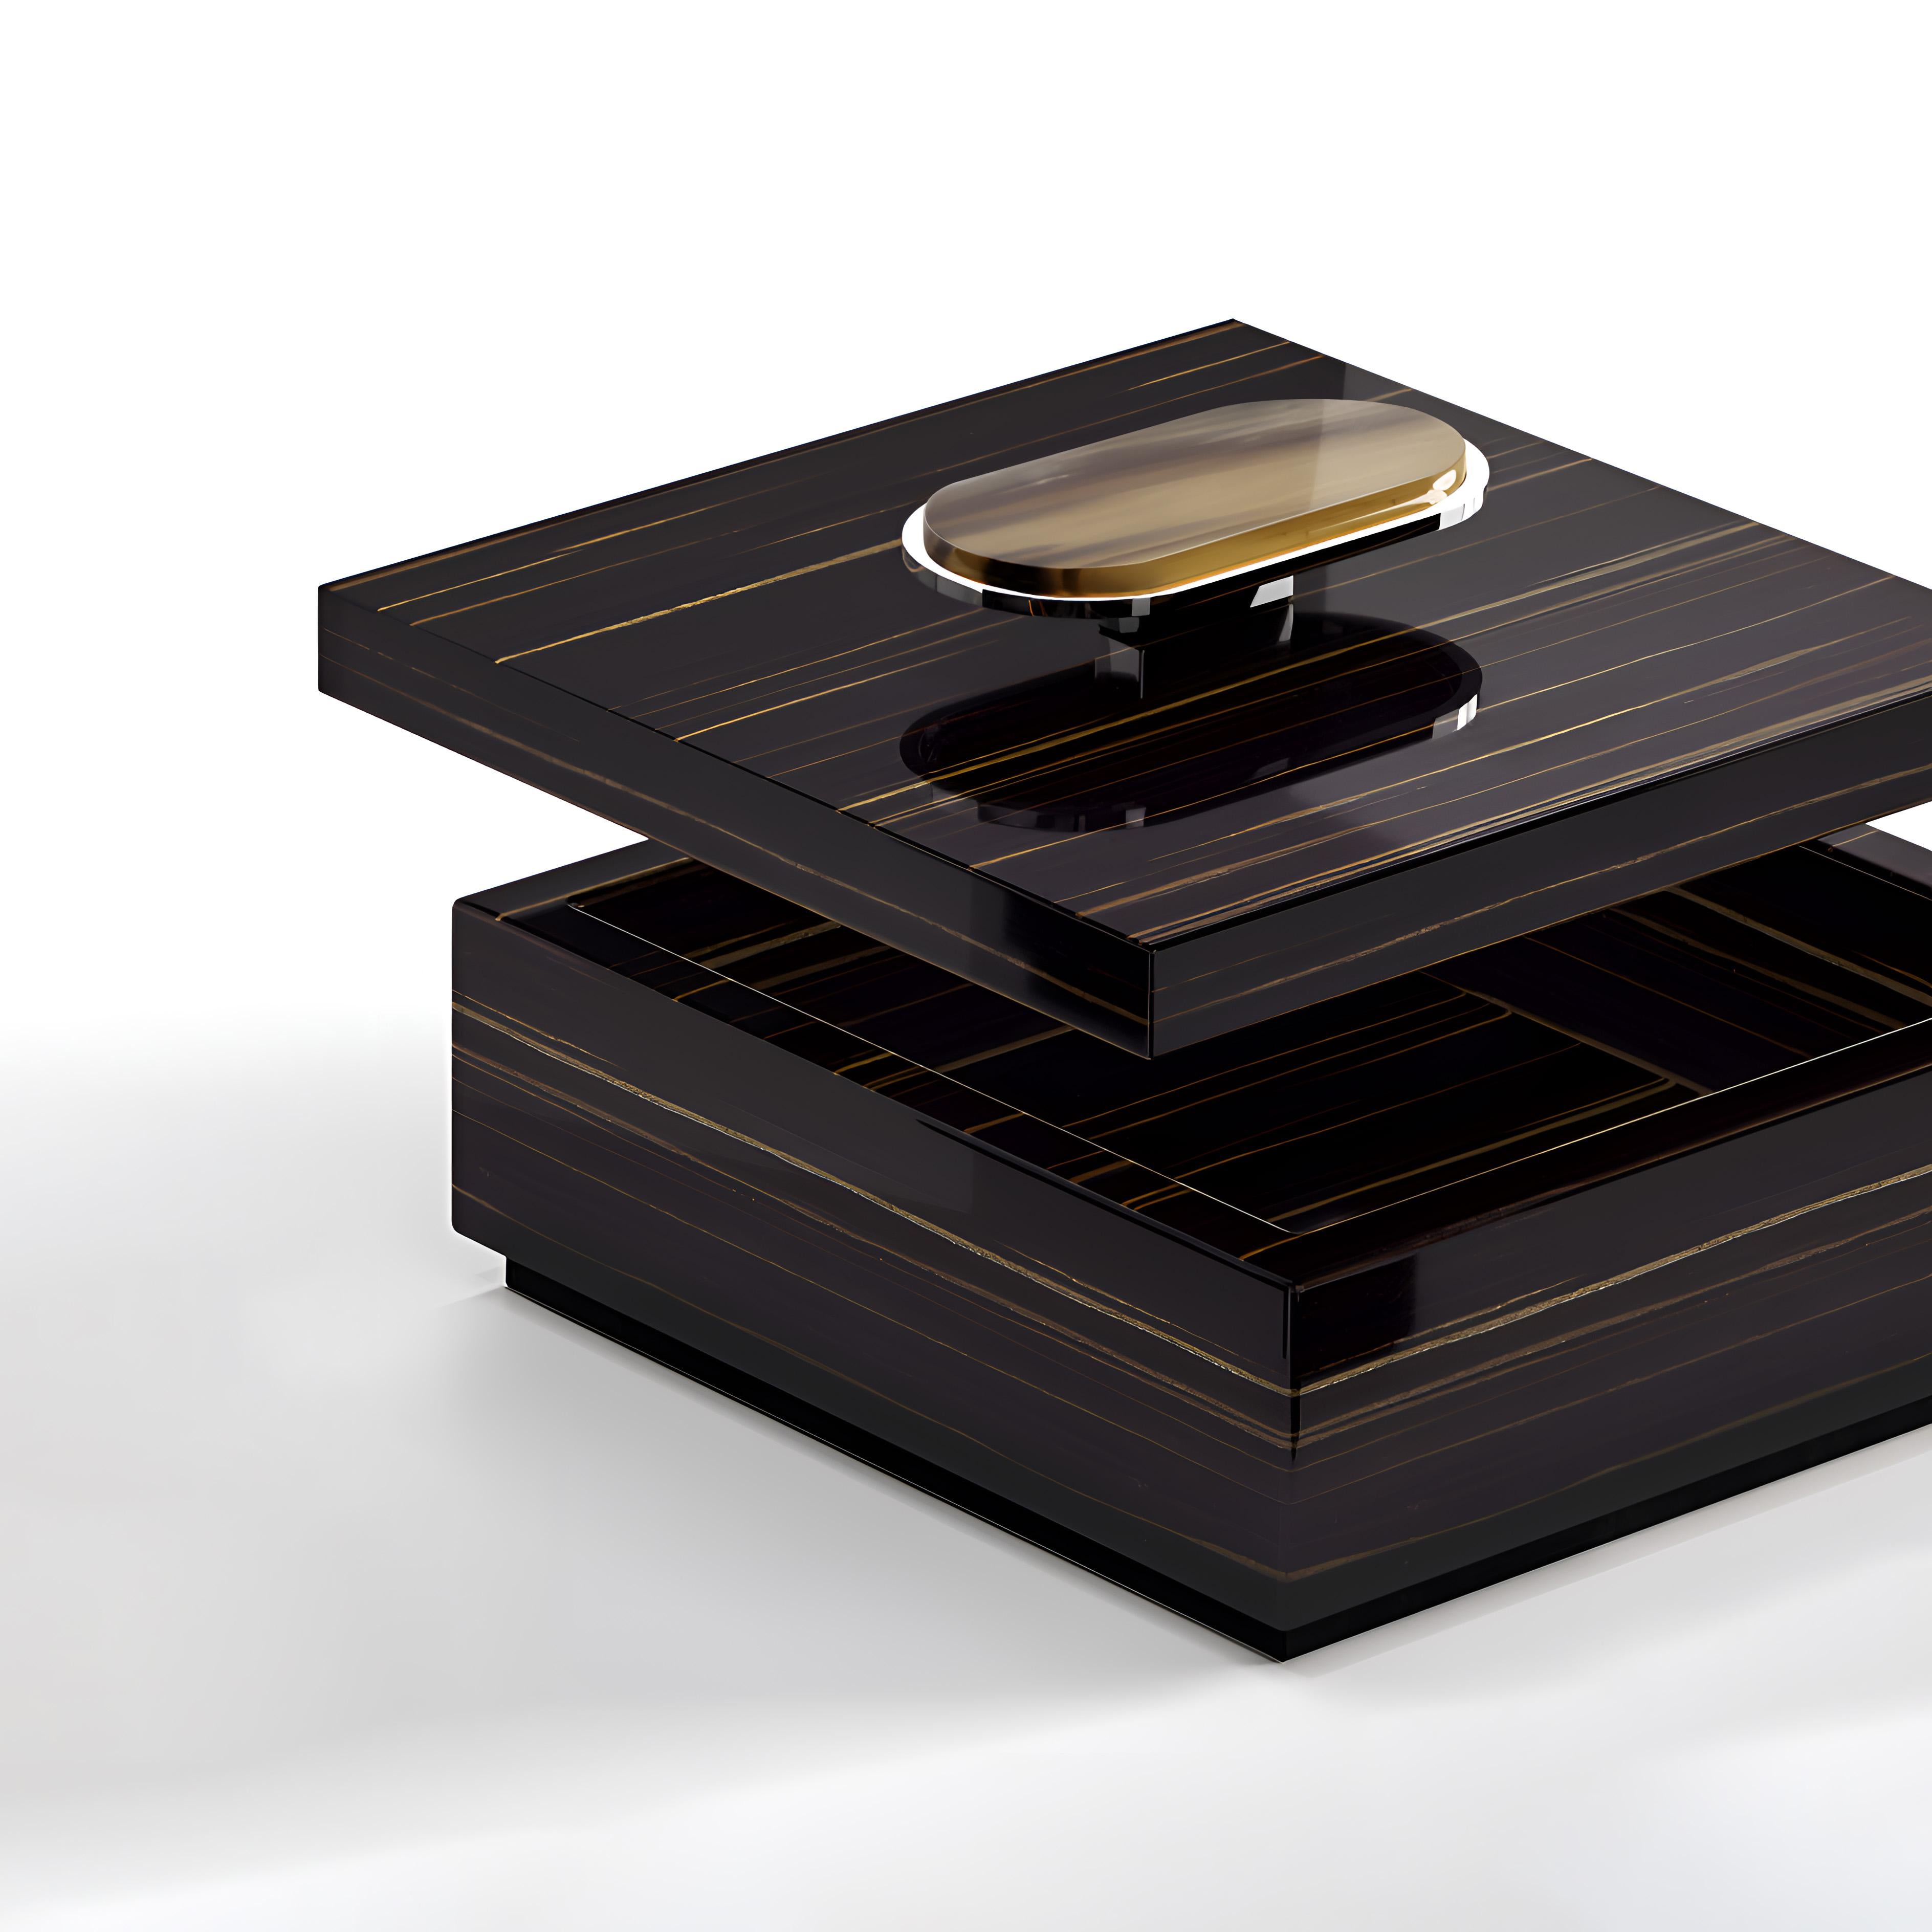 The Priora box is designed to provide an exquisite storage solution for small items. Fashioned from glossy ebony, each box is distinguished by an elegant detail in Corno Italiano and chromed brass decorating the lid. What sets Priora apart are the